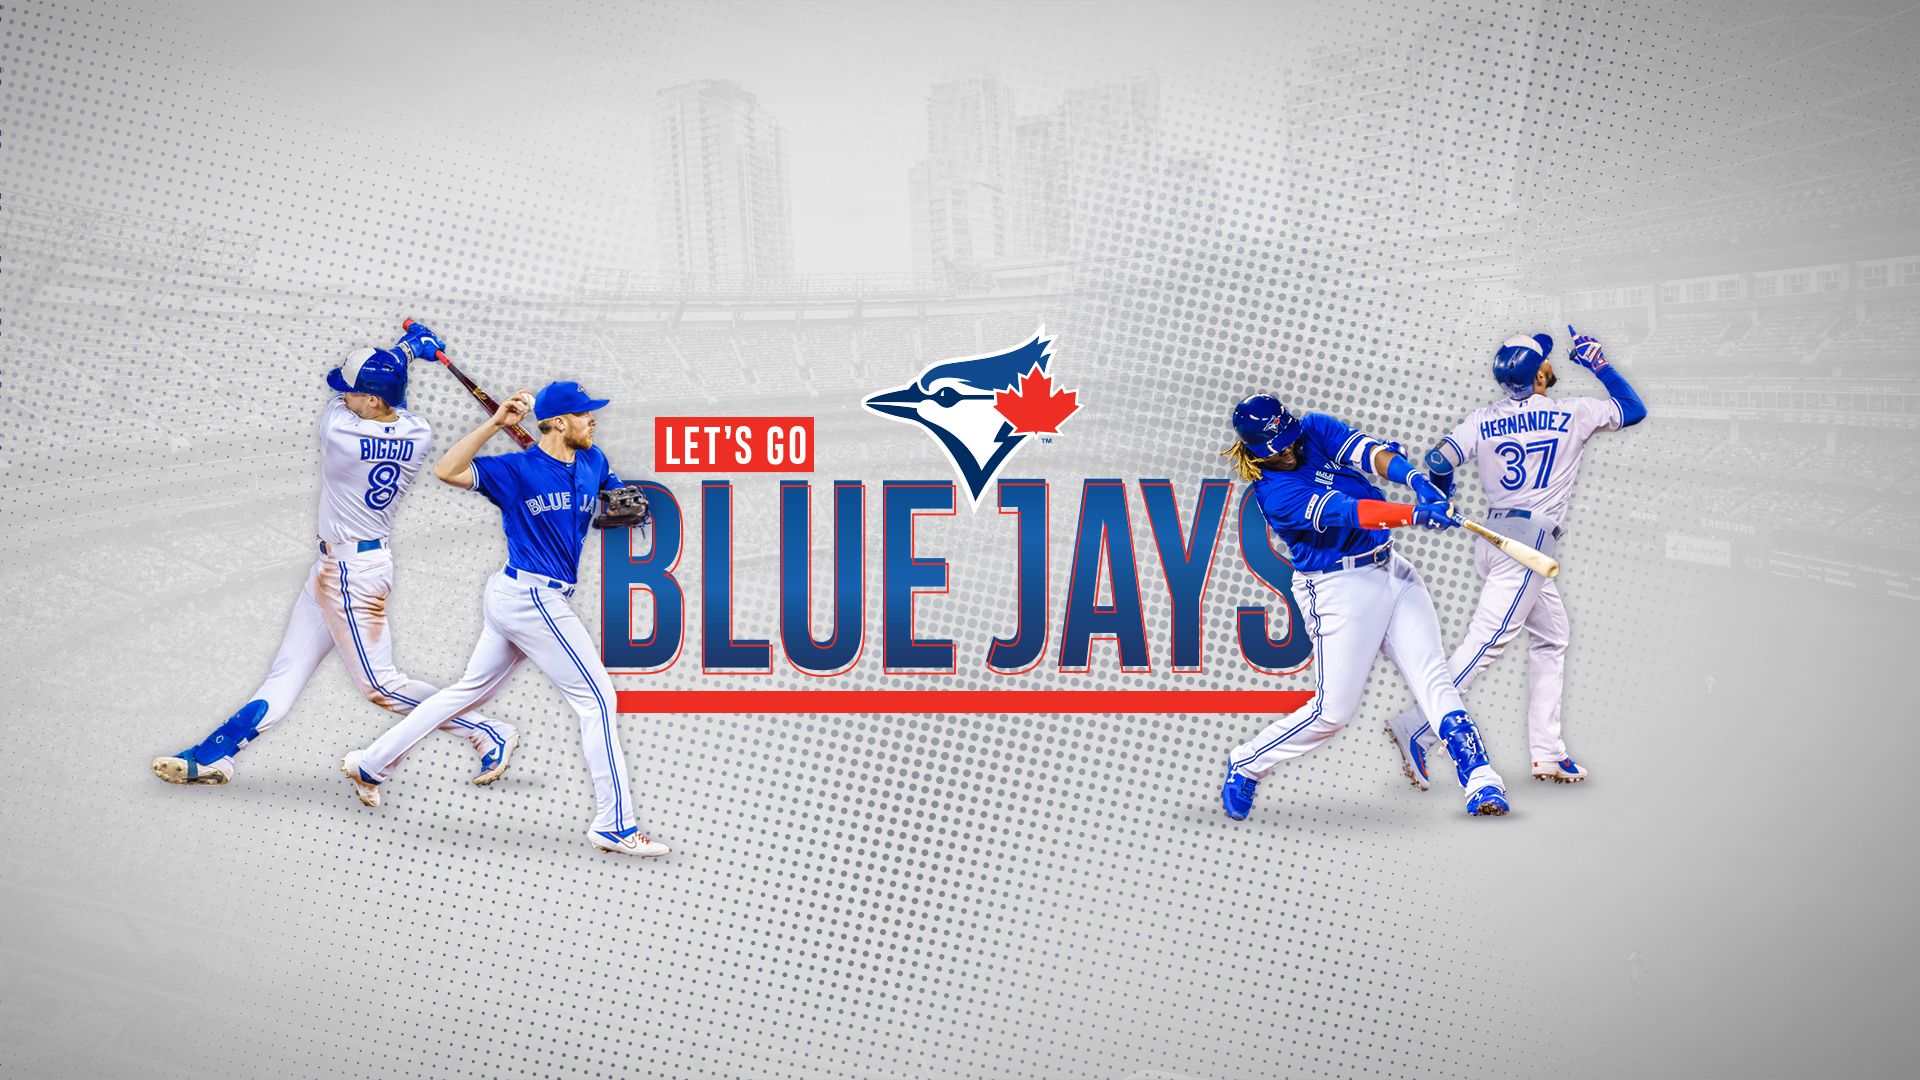 Wallpaper and Covers. Toronto Blue Jays